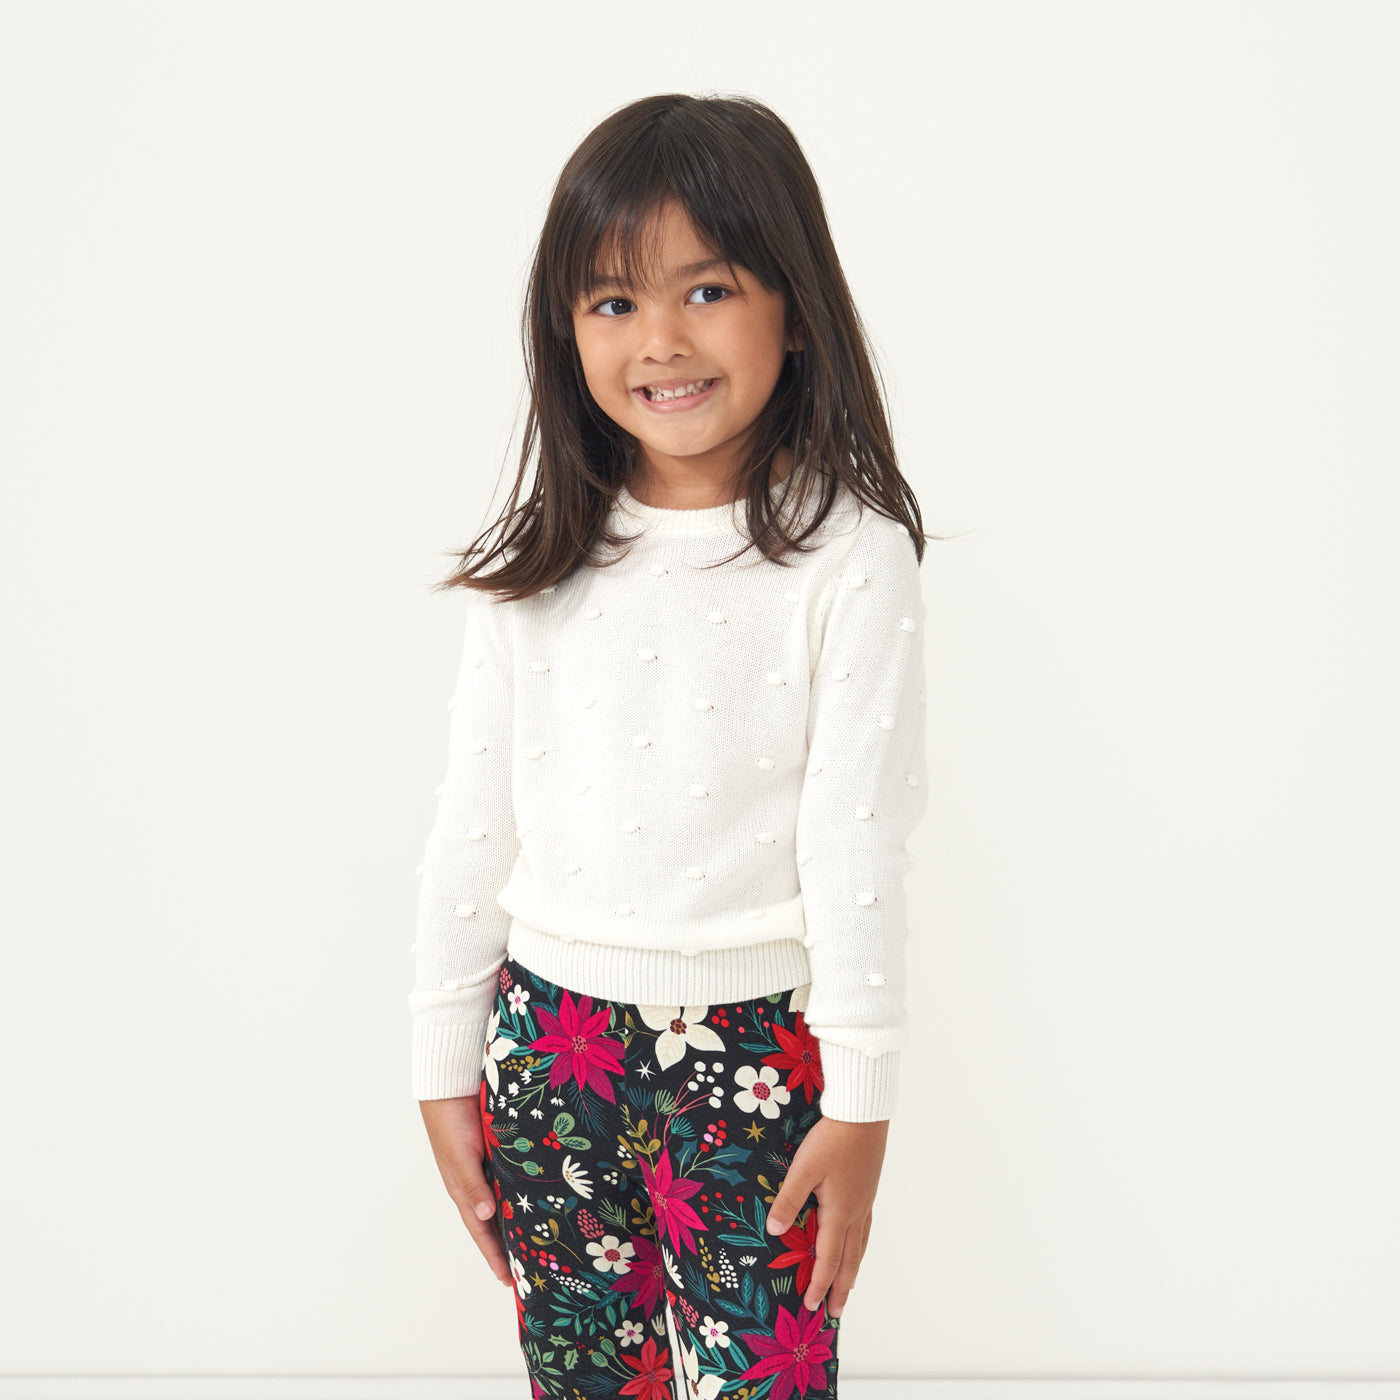 Child wearing an Ivory pom pom sweater and coordinating Berry Merry leggings